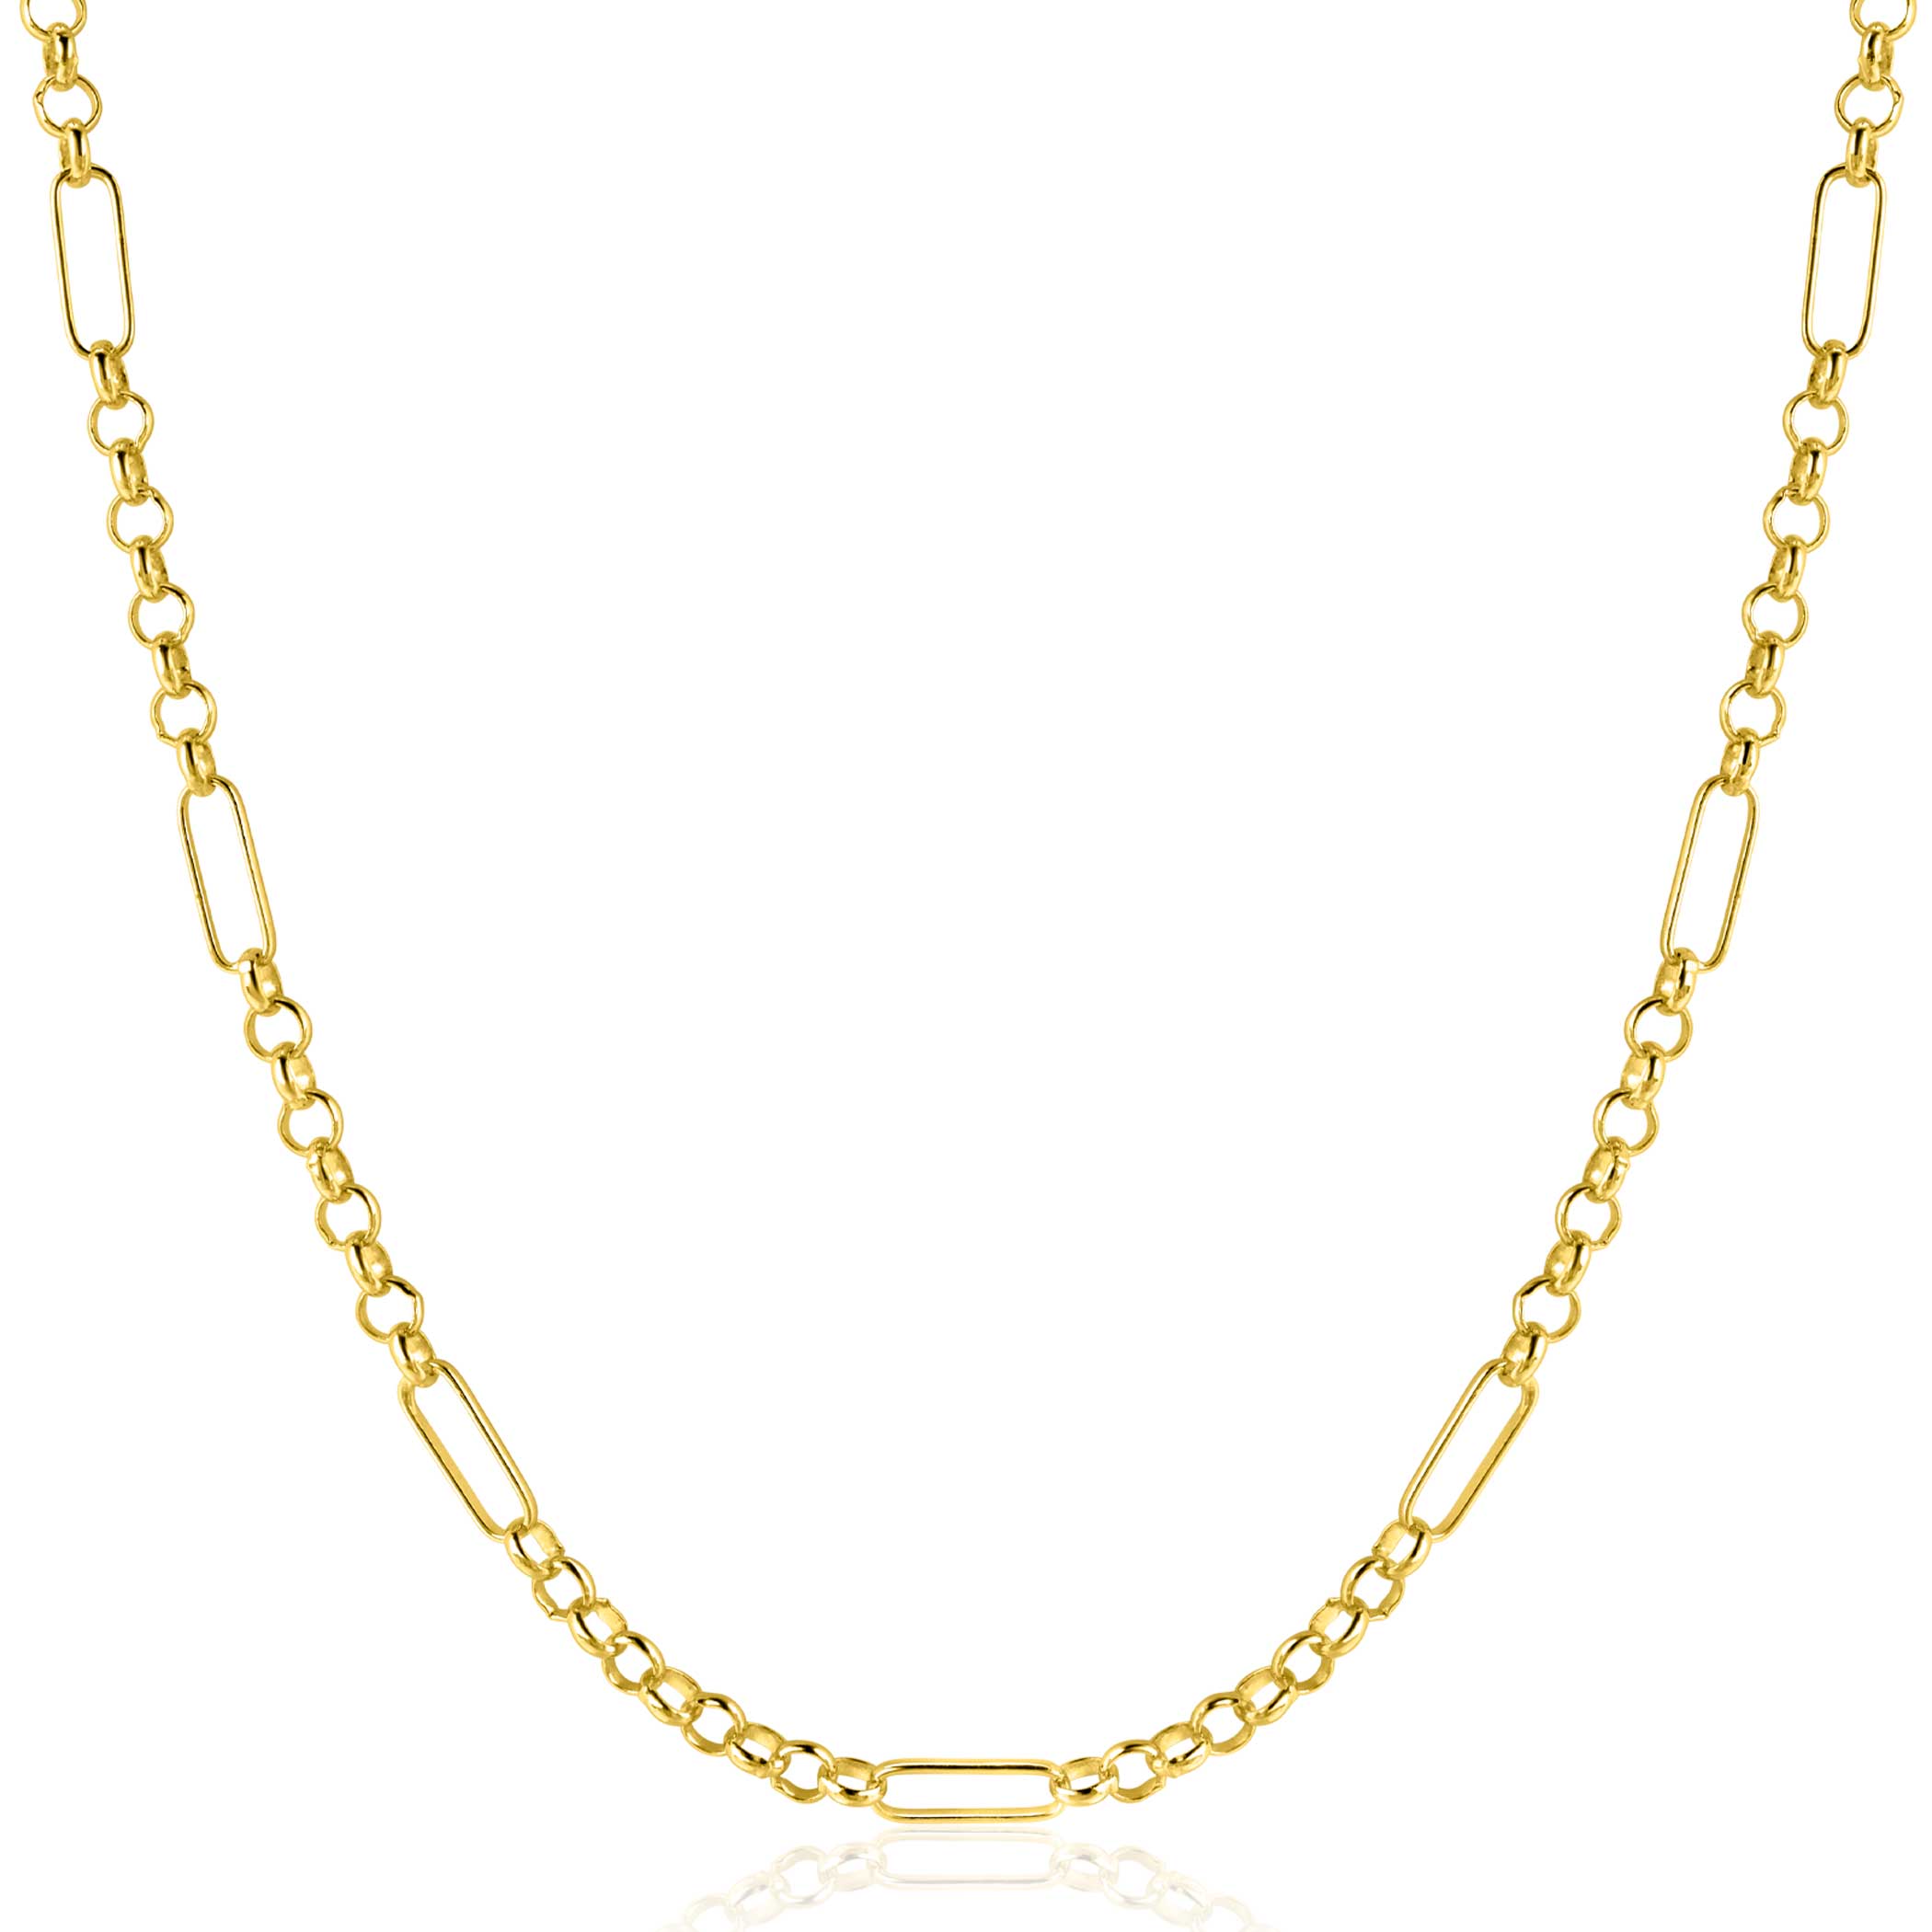 ZINZI Gold 14 karat solid gold necklace with paperclip links combined with curb links 41-43cm ZGC495
